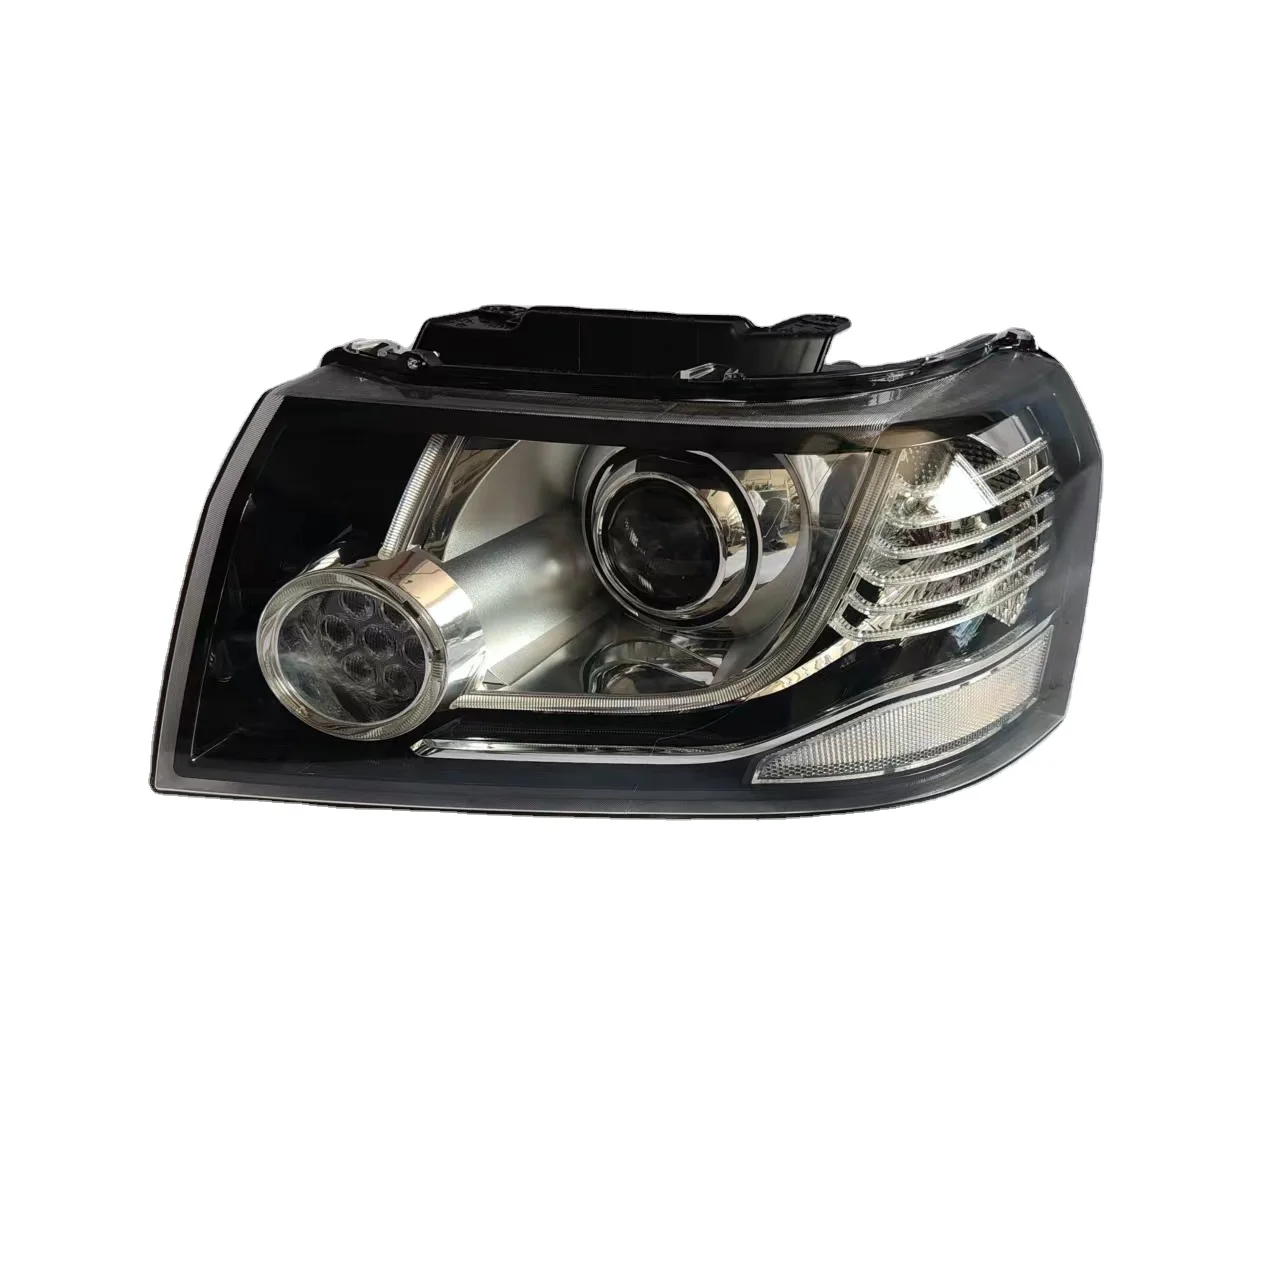 

headlight led for car Manufacturer's direct sales of For Land Rover vehicle lighting system Shener 2013 hernia headlights